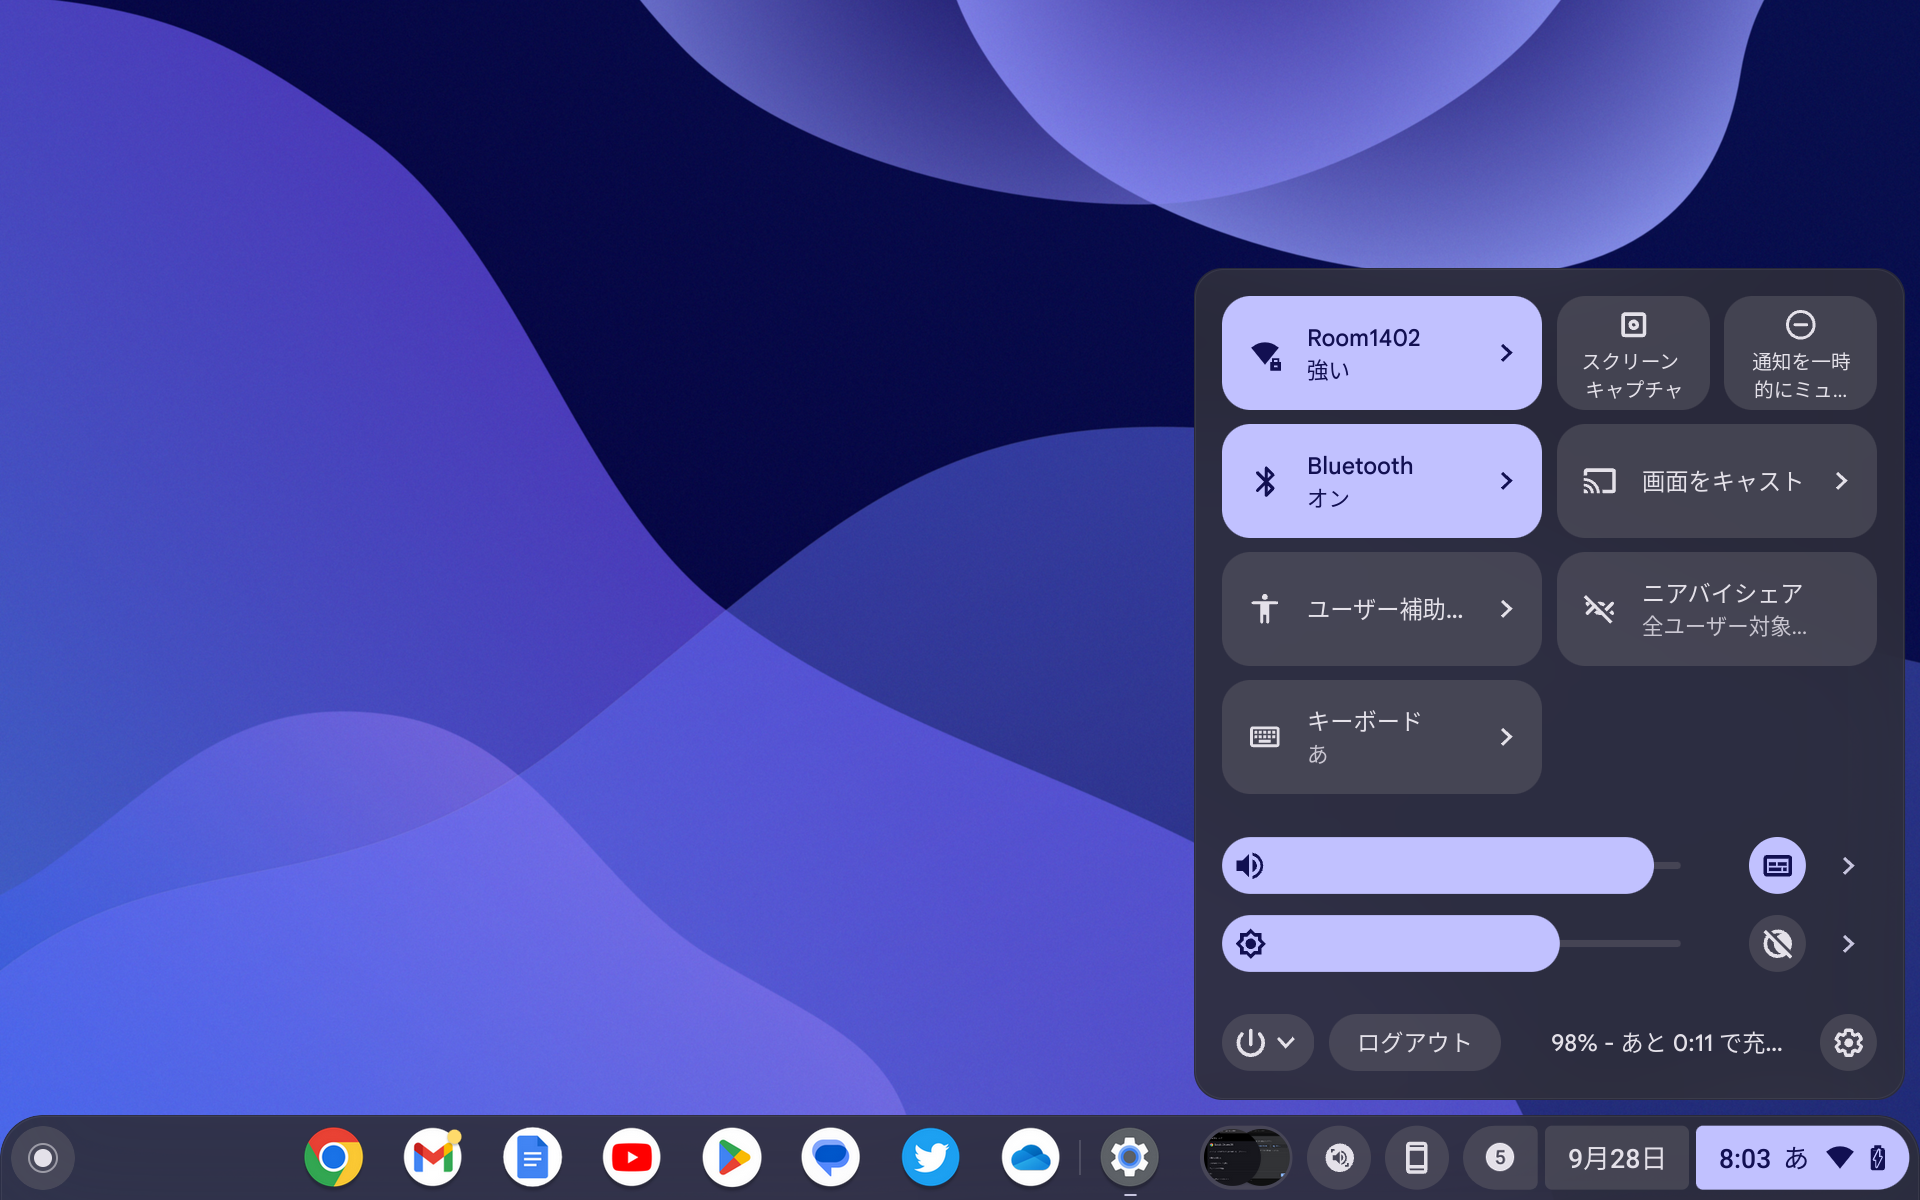 “ChromeOS 117” with “Material You” theme is now an official release – Window Forest